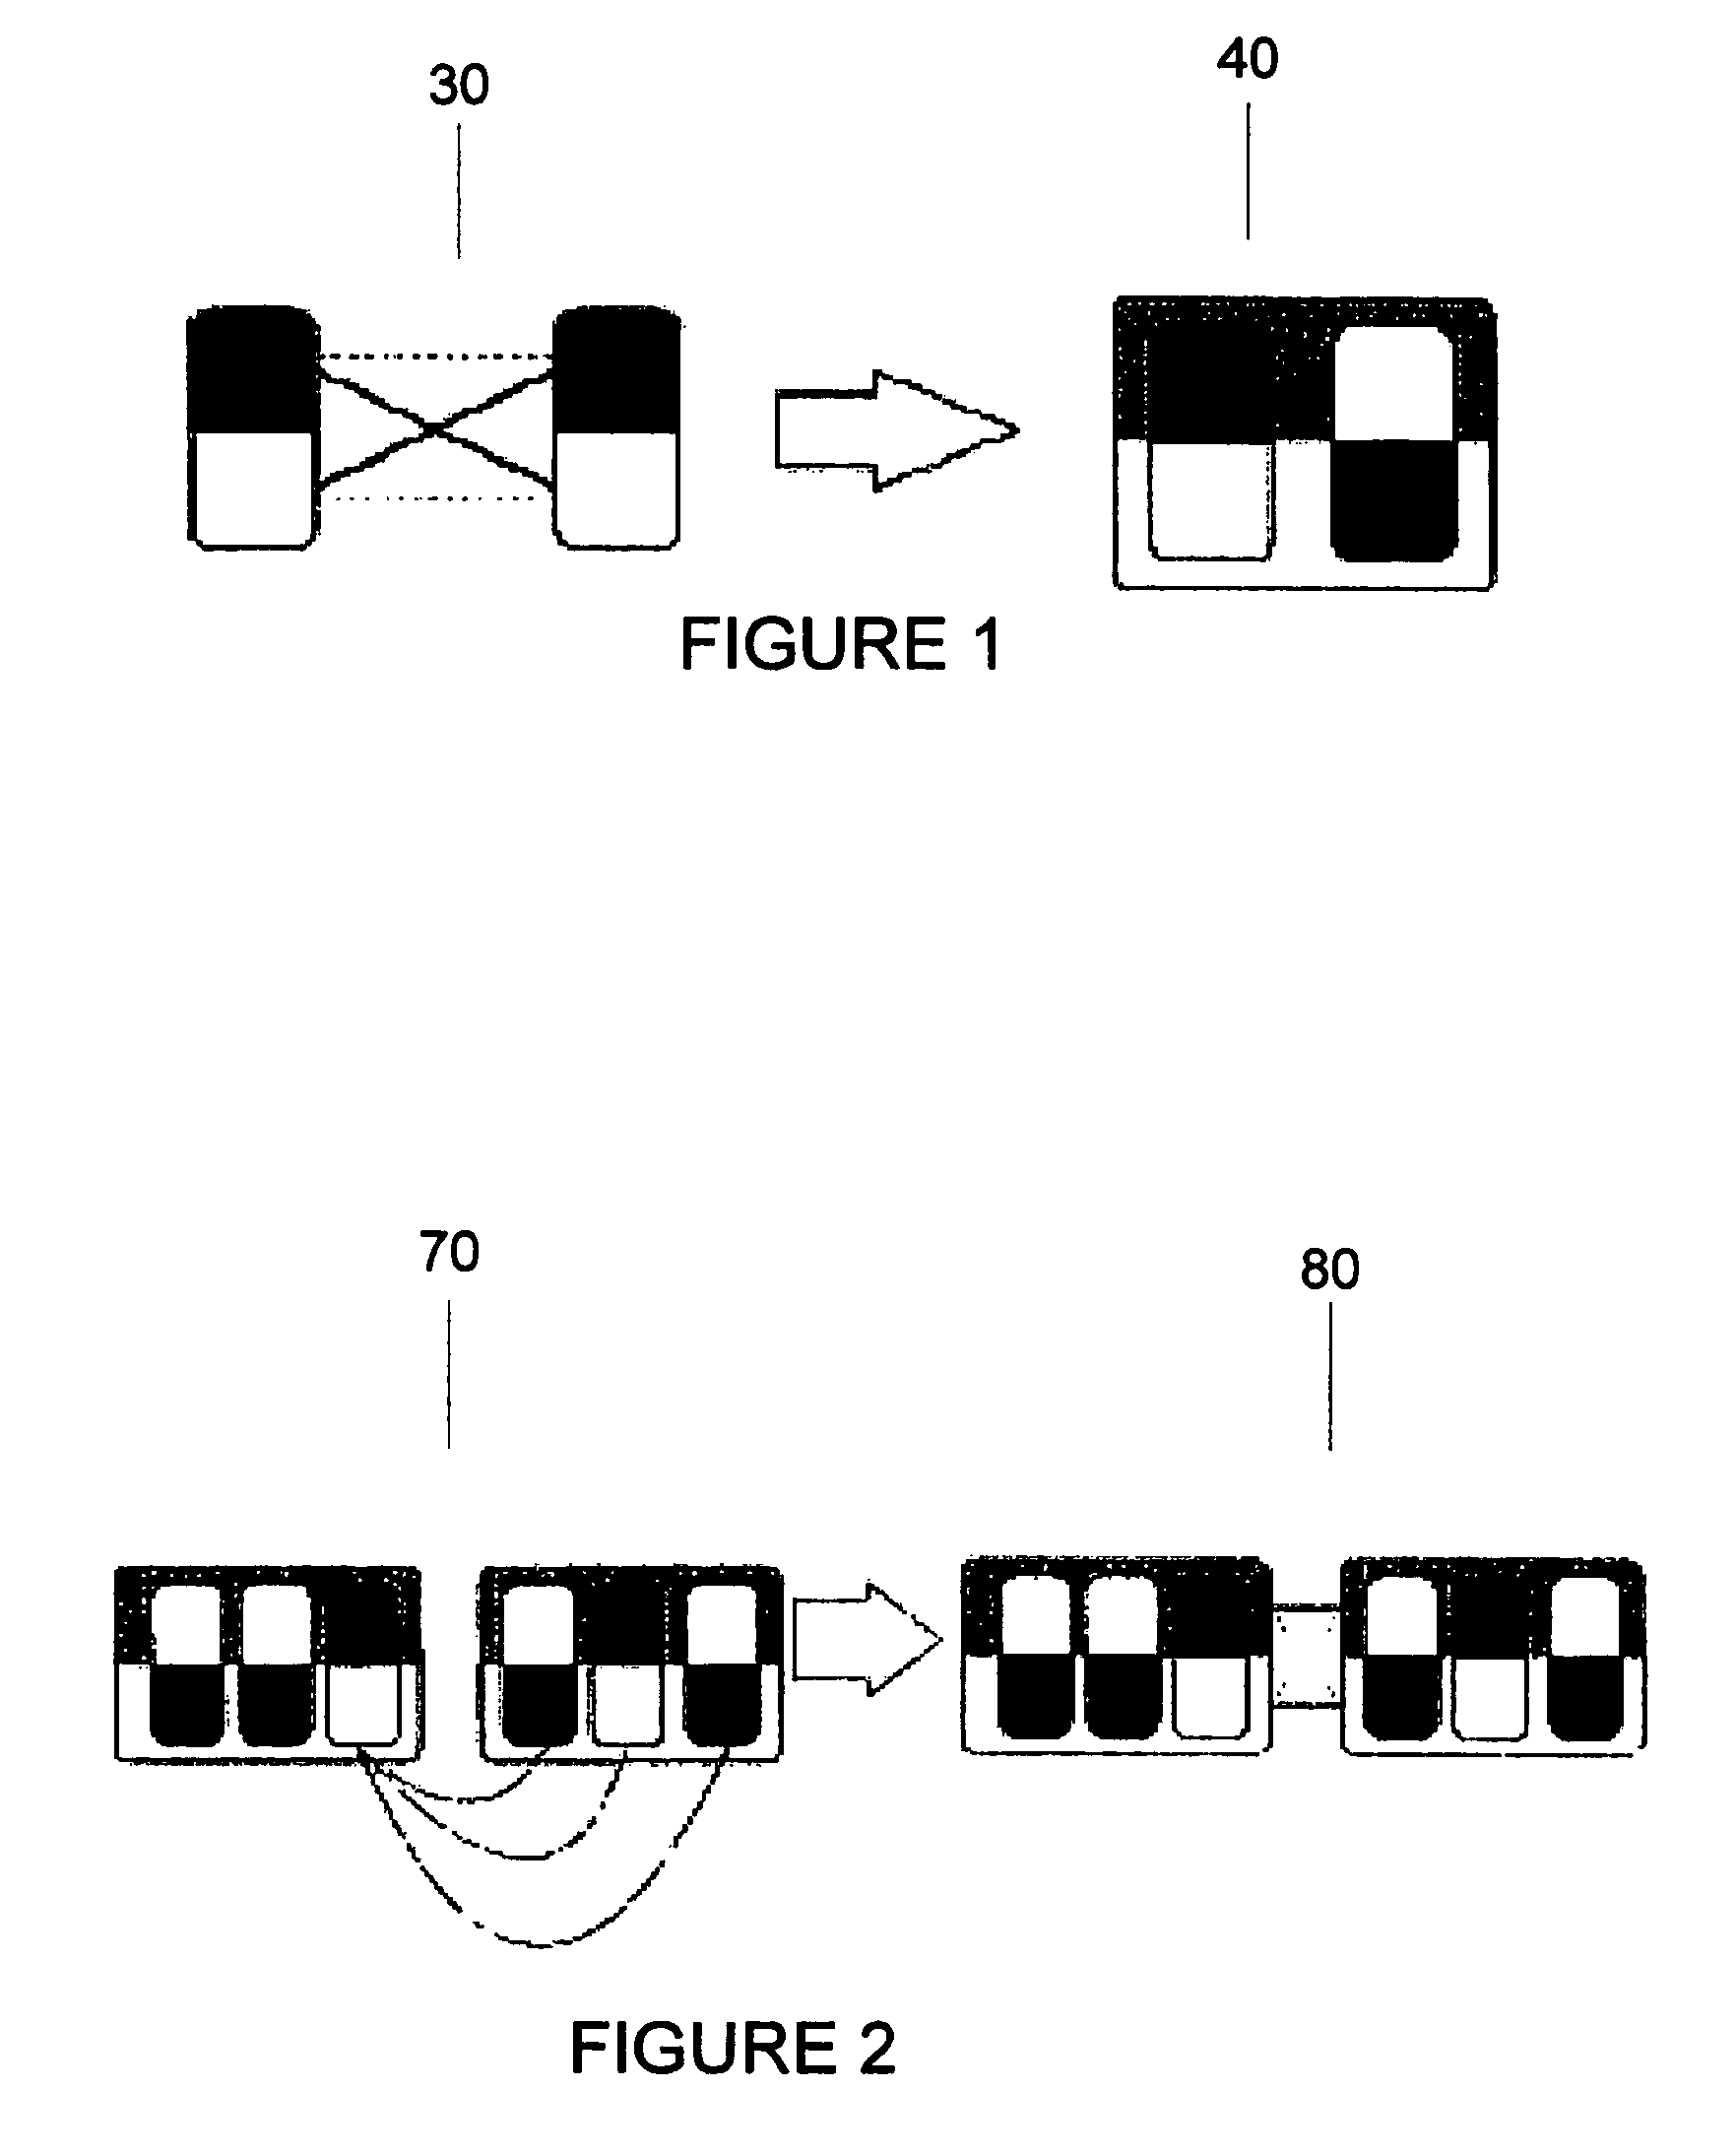 Process, software arrangement and computer-accessible medium for obtaining information associated with a haplotype